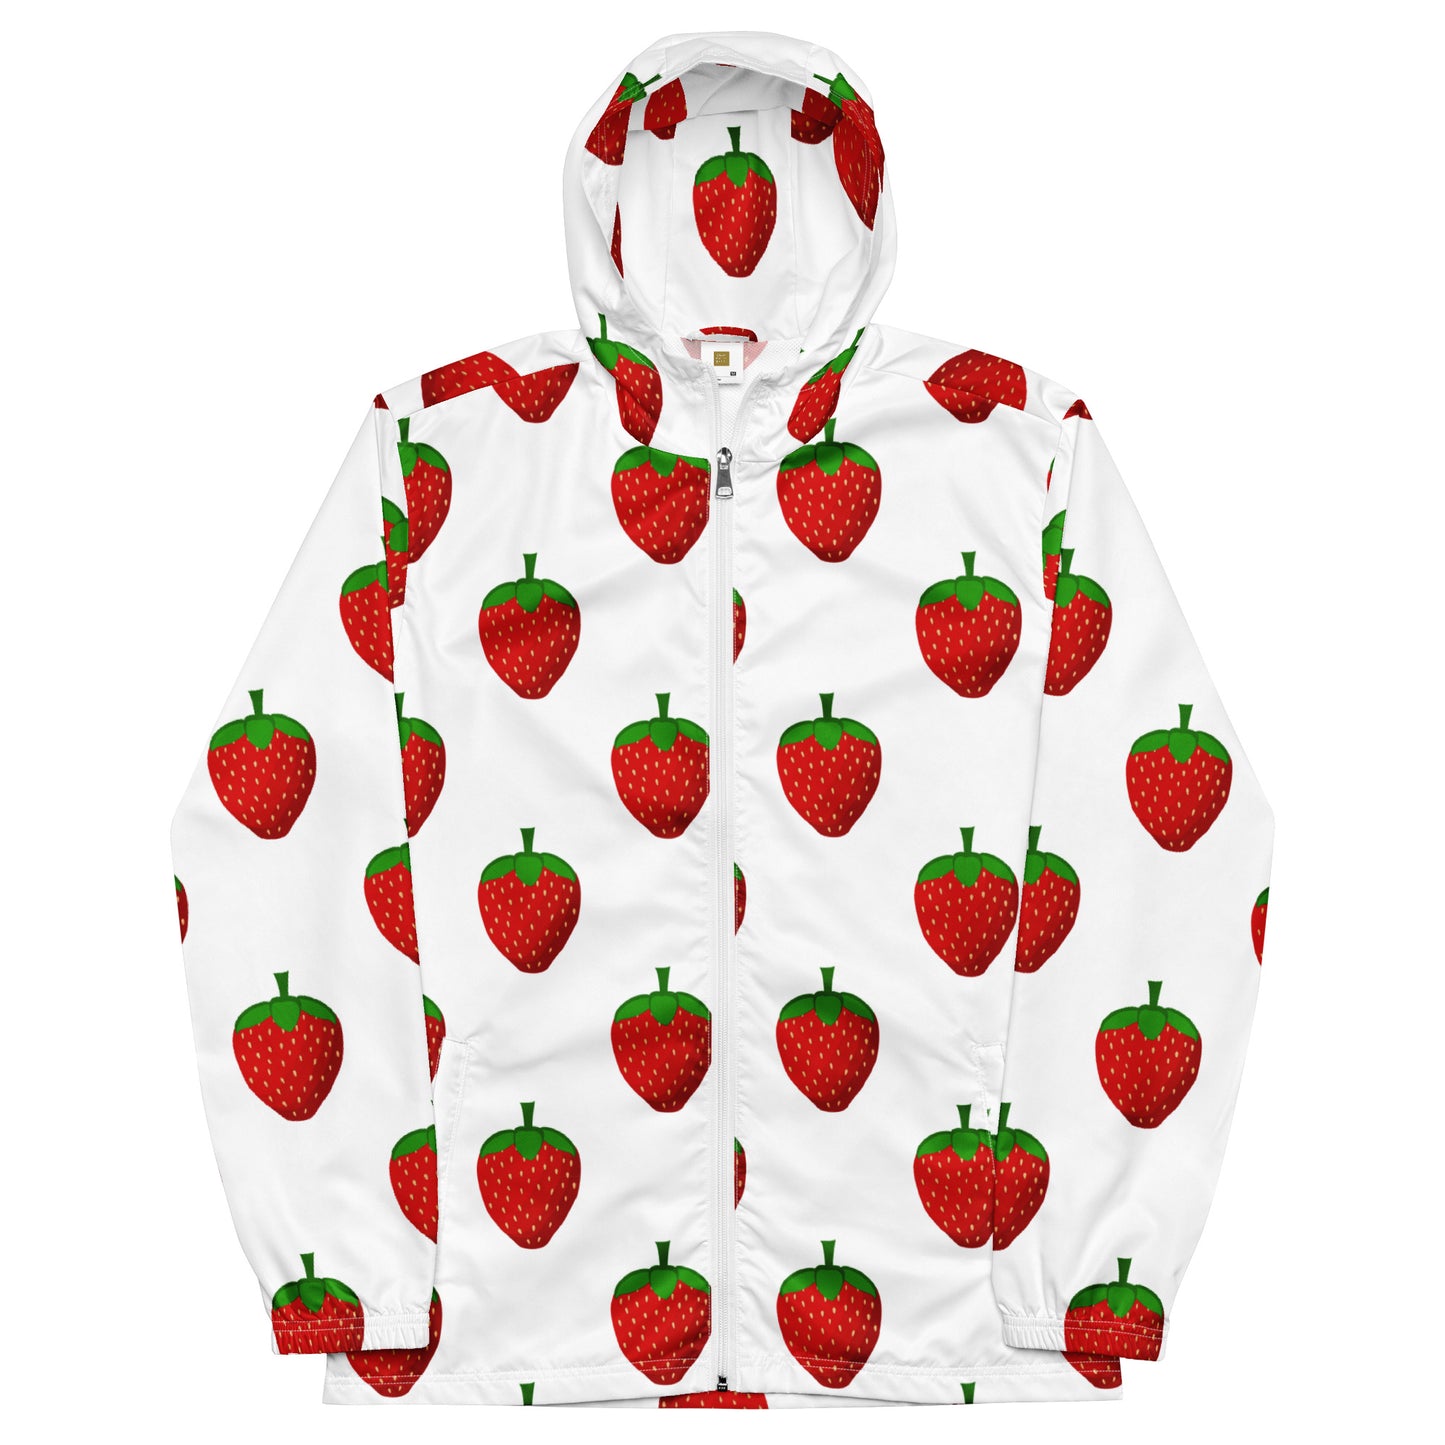 Strawberry Party - Inspired By Harry Styles - Sustainably Made Men’s windbreaker